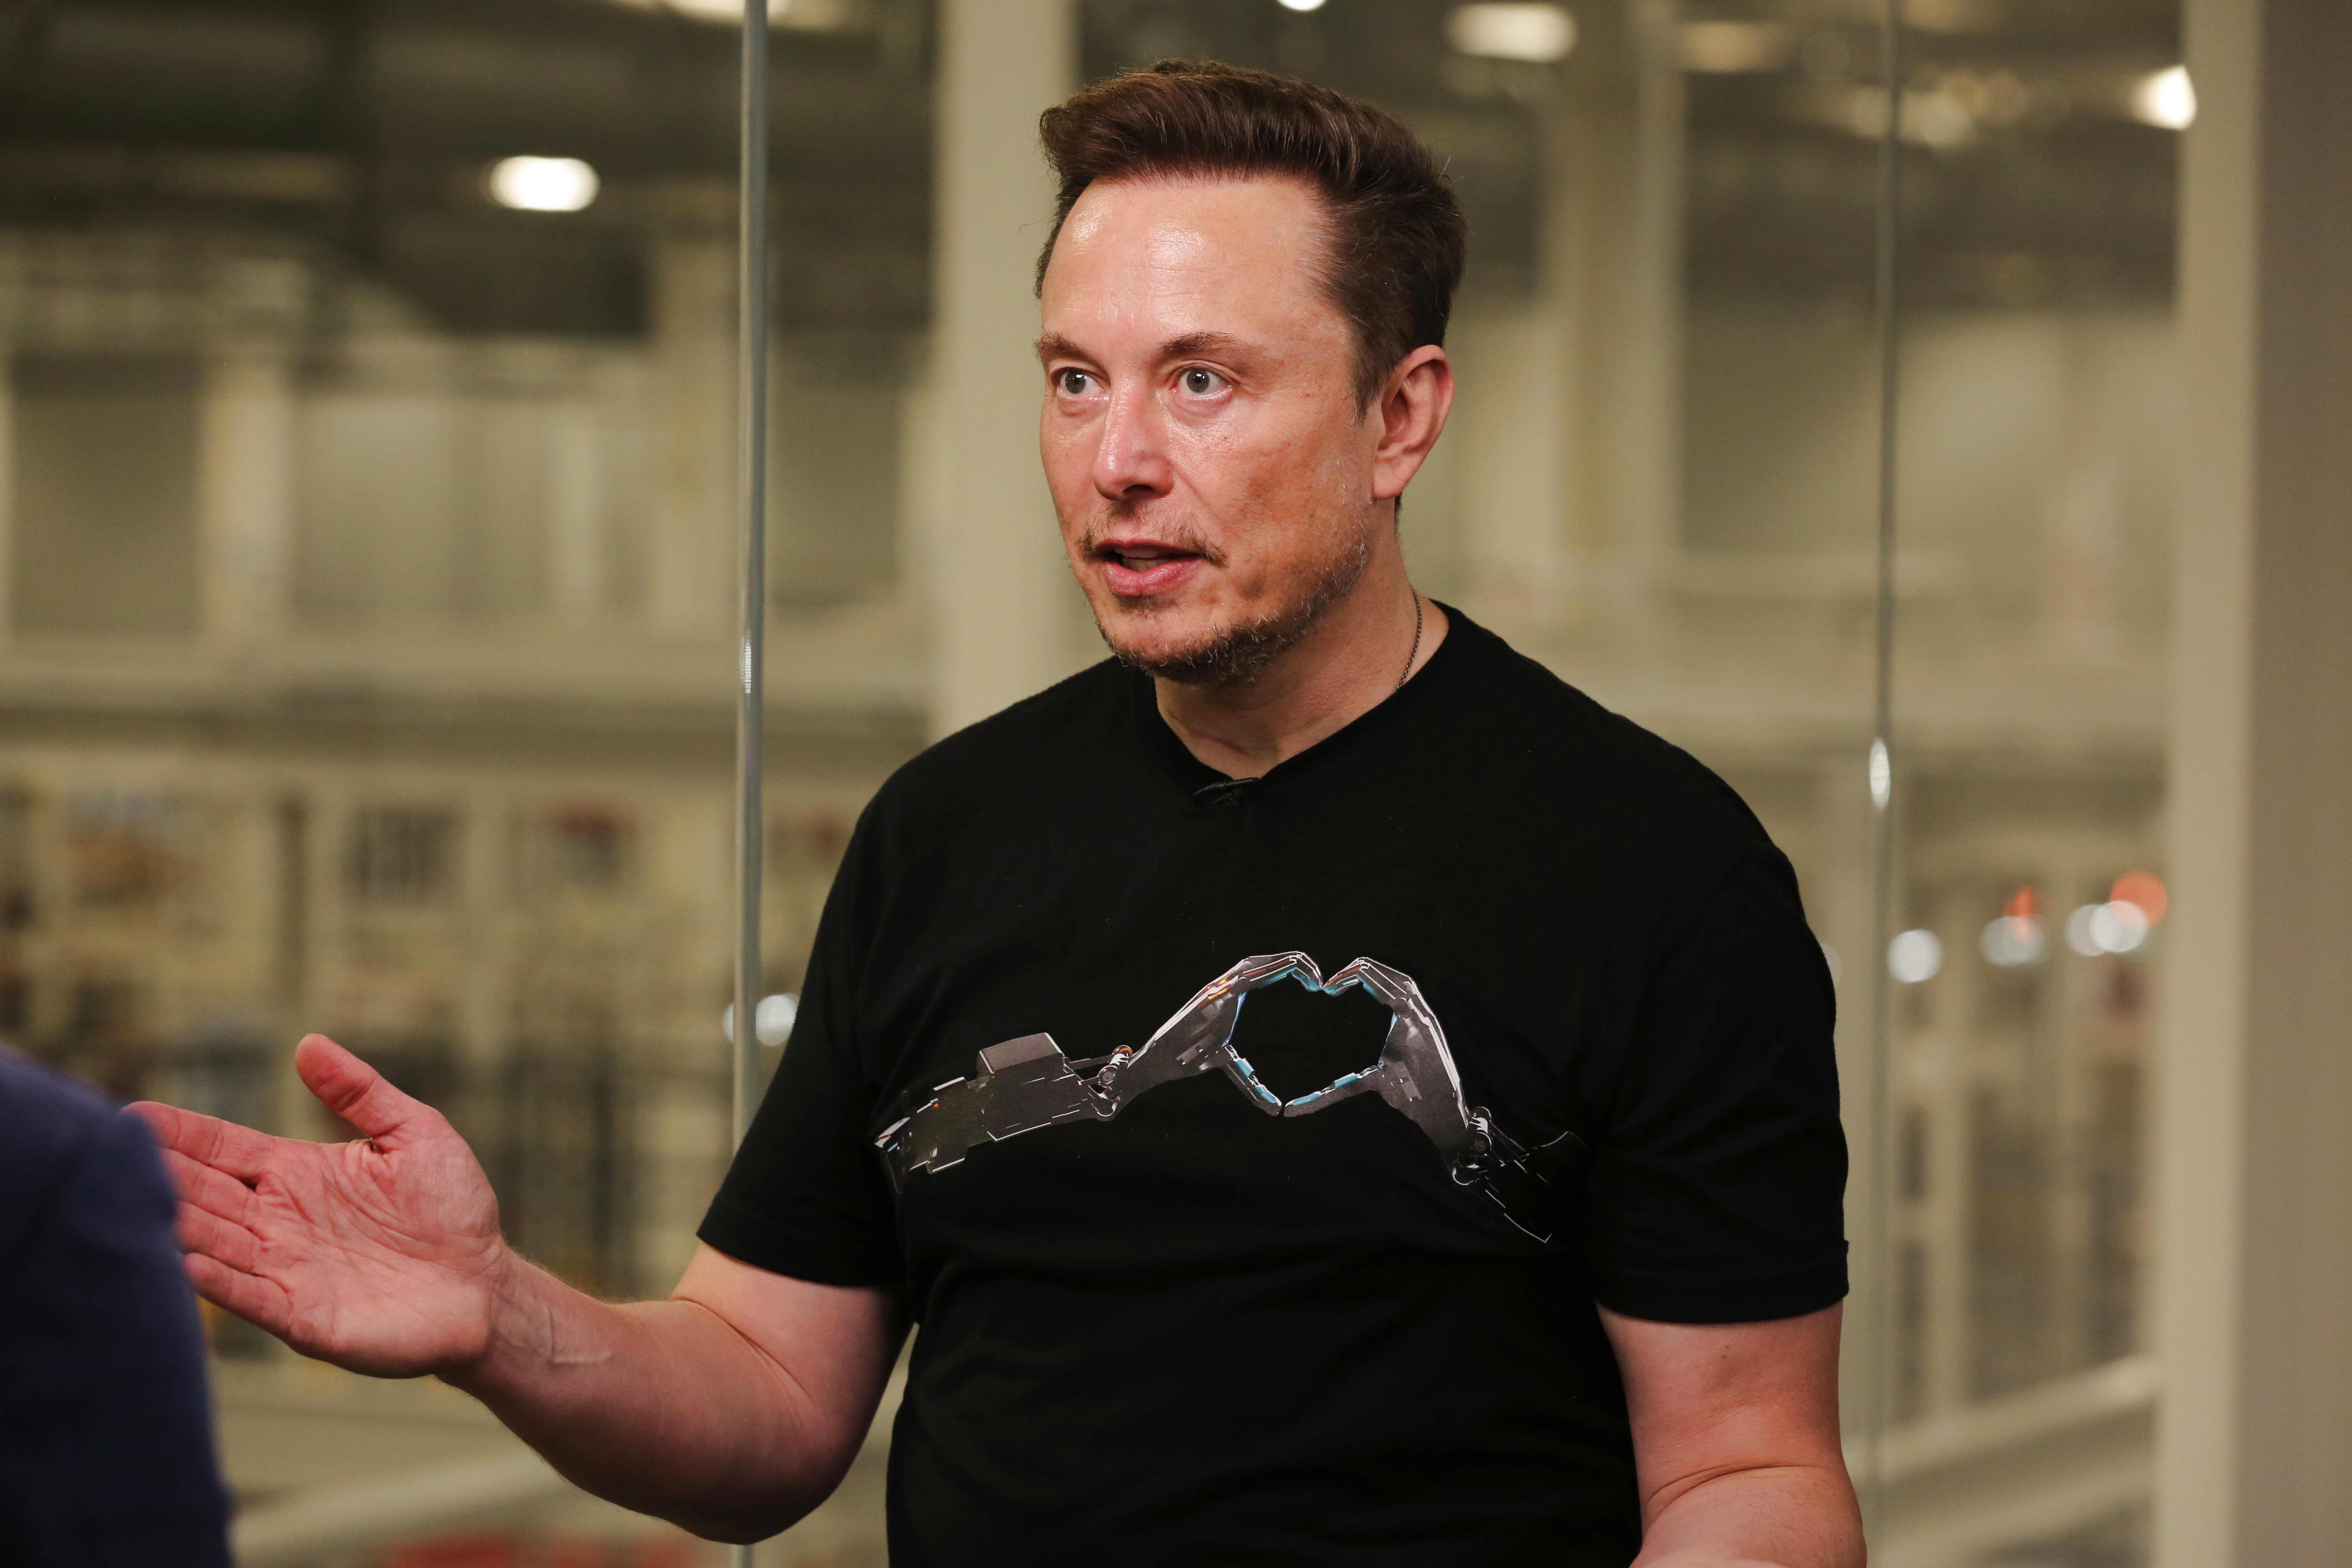 Elon Musk's quest for an irresistible price could spell trouble for Tesla and its stock